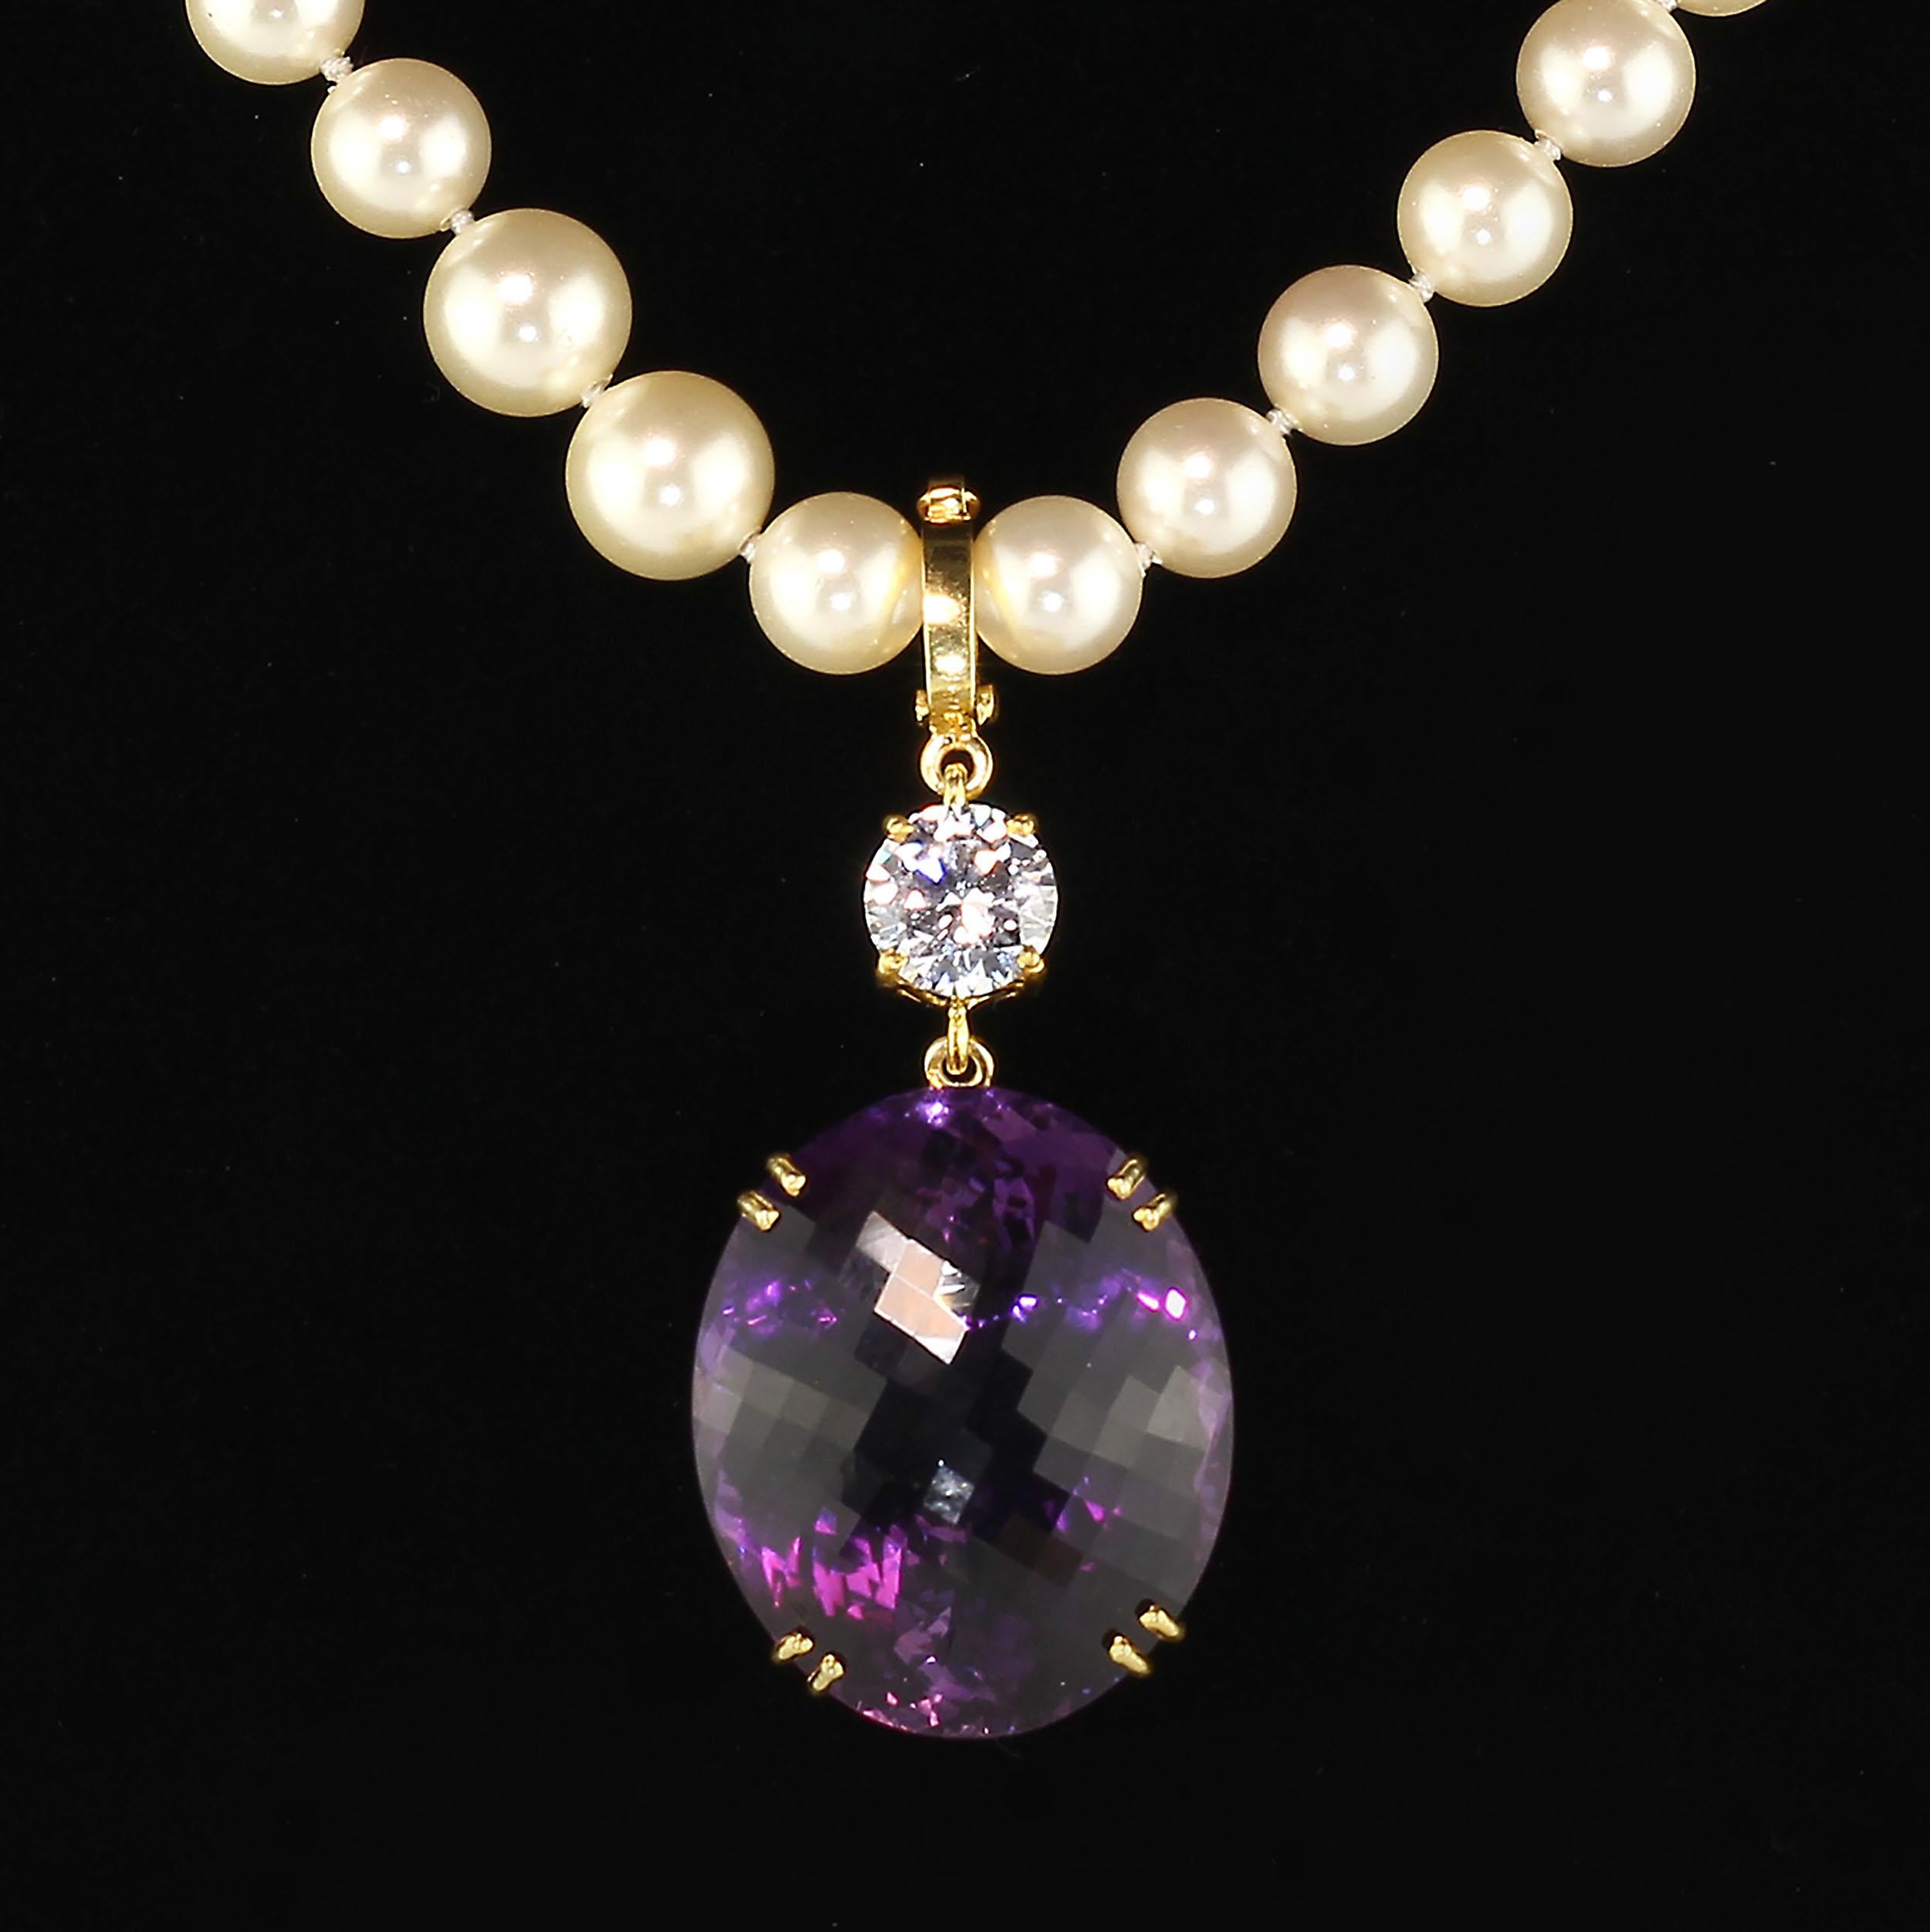 This incredible large Amethyst pendant sparkles and flashes as it moves. The 67.58 carat checkerboard table Amethyst is accented with a white genuine Zircon of 3.96 carats. Both gemstones sit in handmade woven baskets of gold rhodium plated Sterling